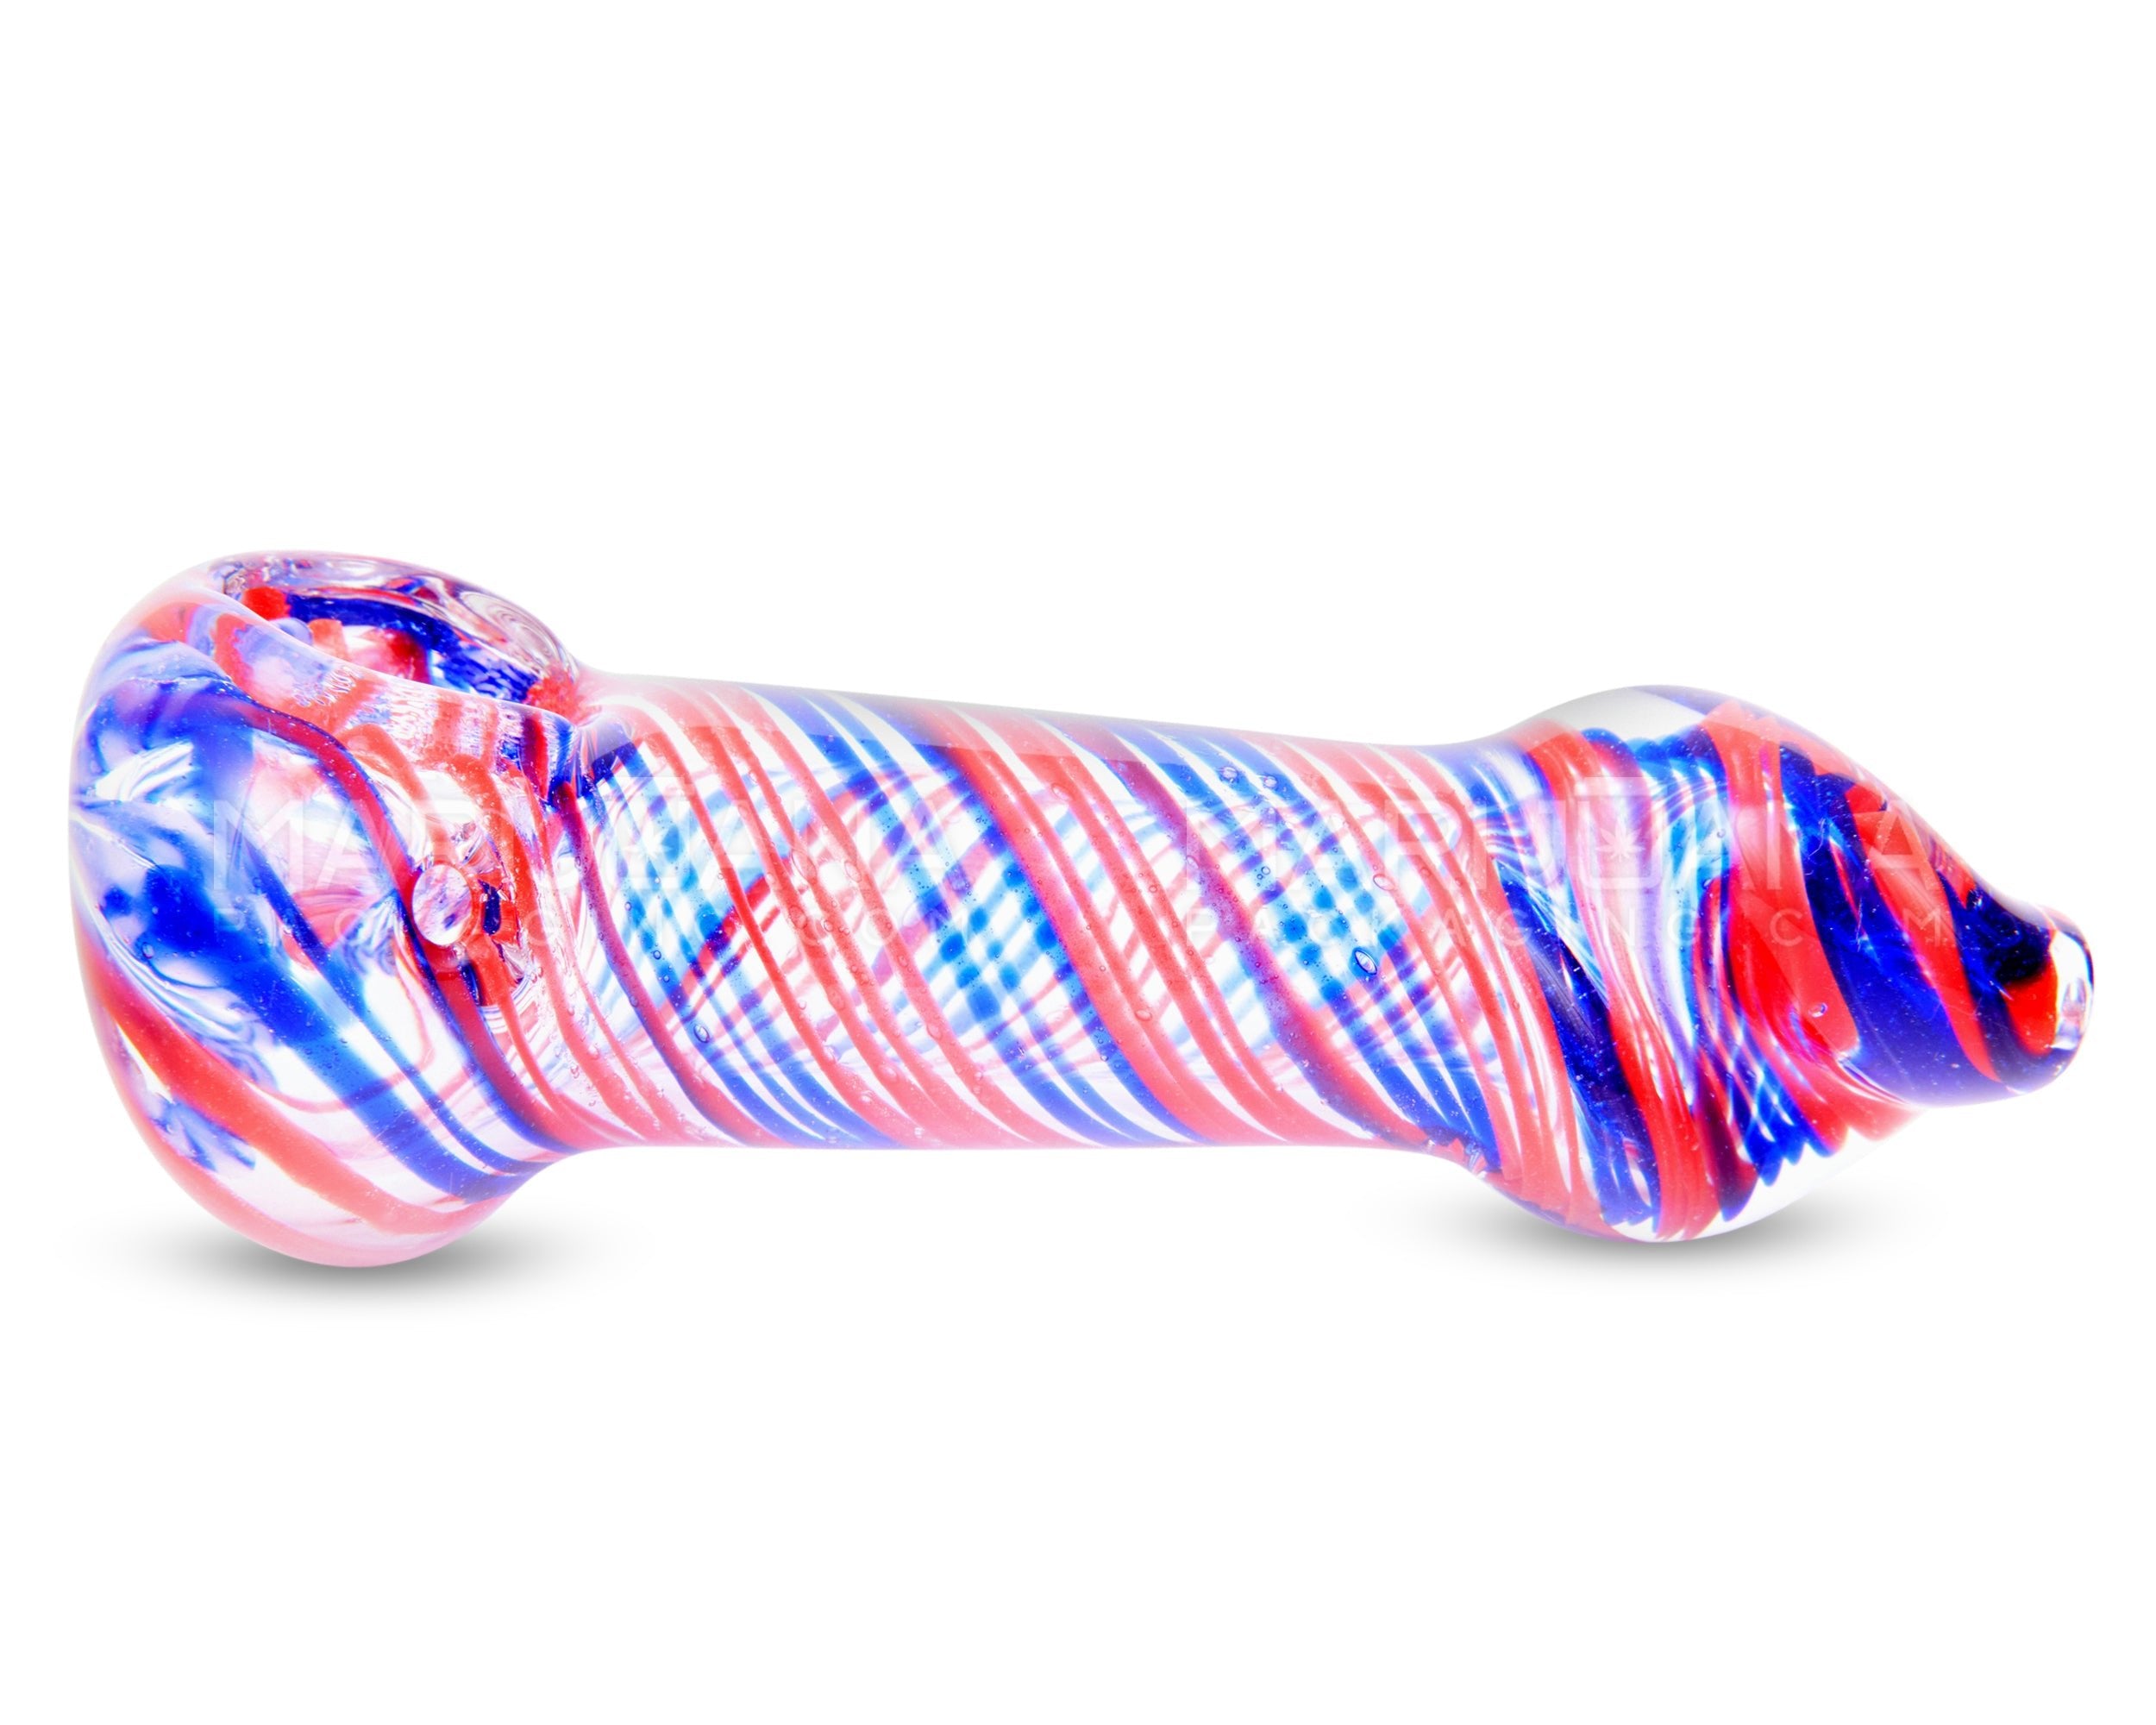 Variety Mouthpiece Spiral Spoon Hand Pipe w/ Ribboning | 4.5in Long - Glass - Assorted - 6